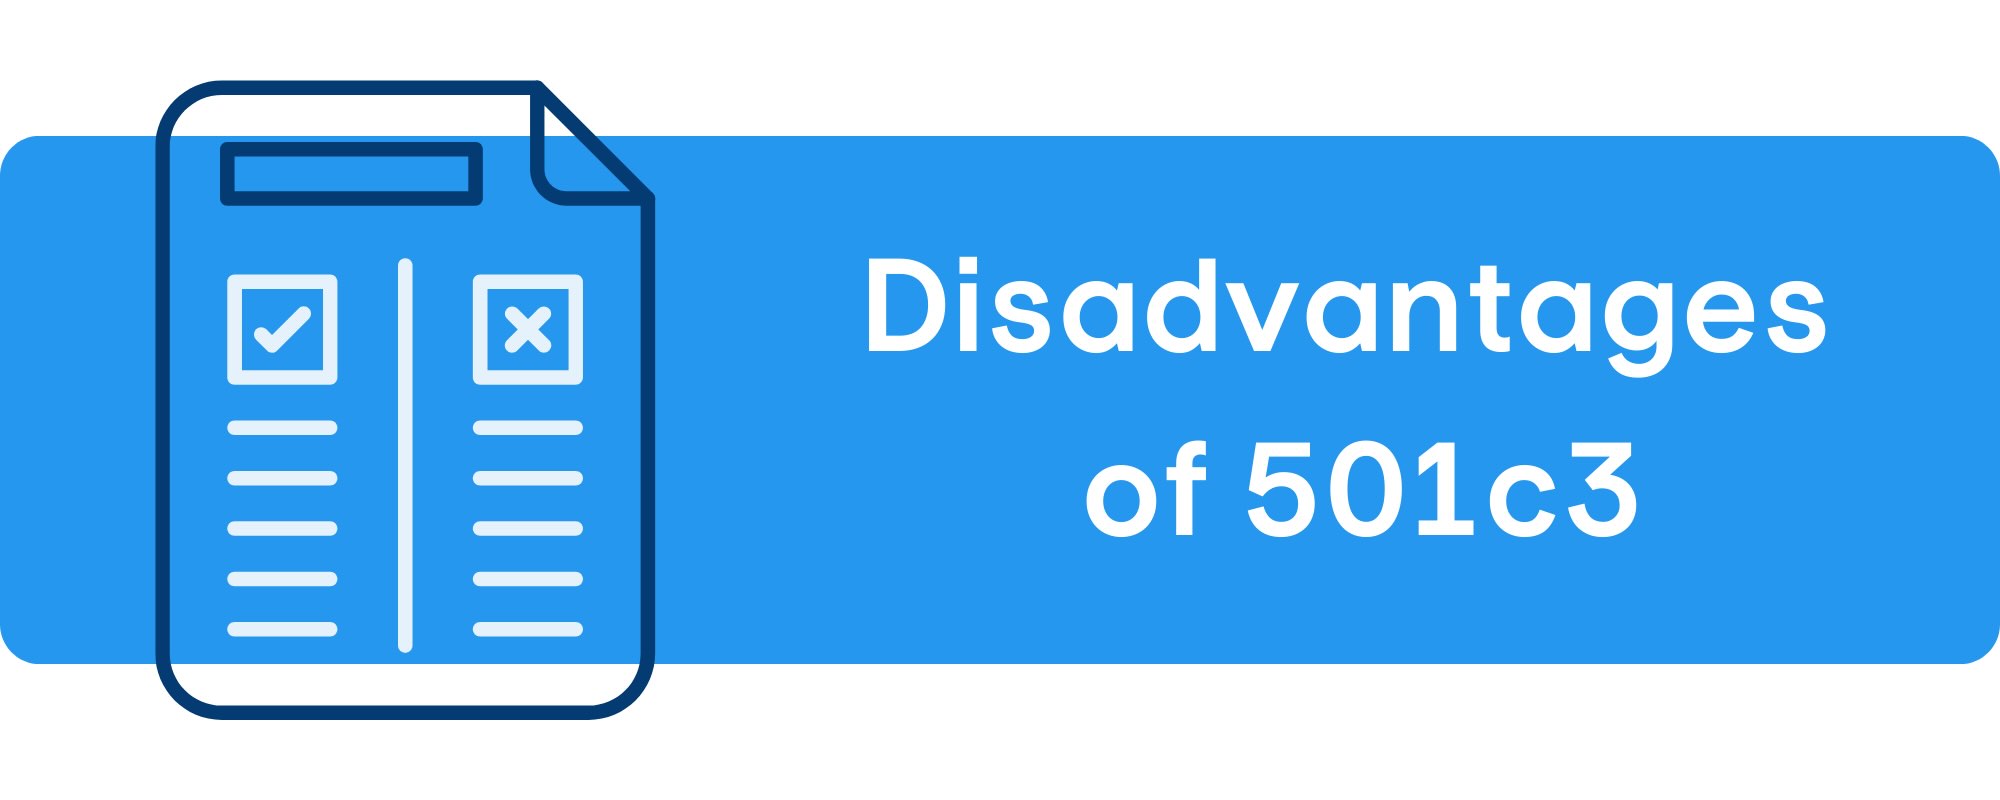 It's important to carefully consider these potential drawbacks before pursuing 501c3 status for your church or religious organization